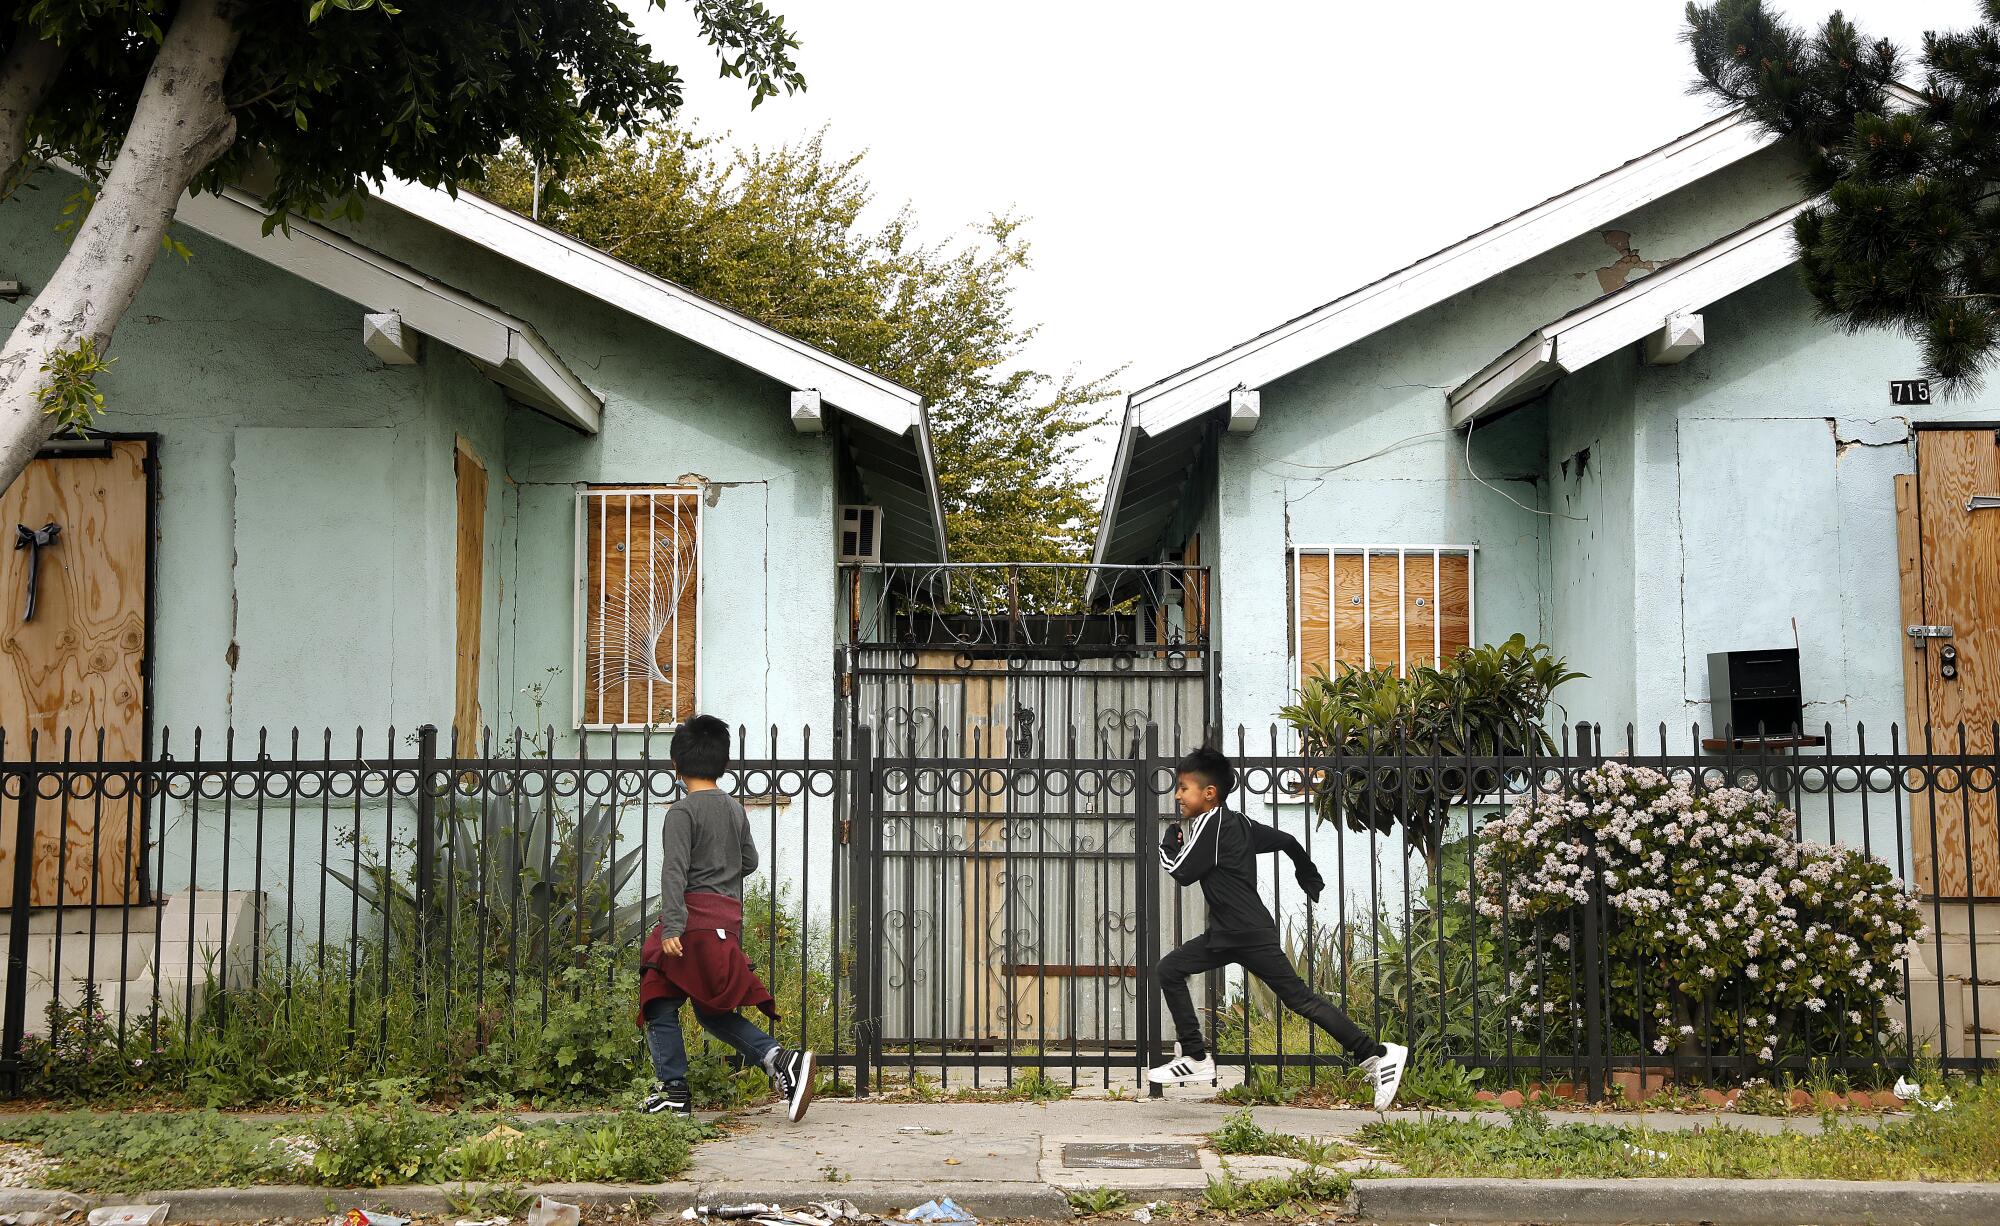 Two kids run past a metal fence and boarded up homes 